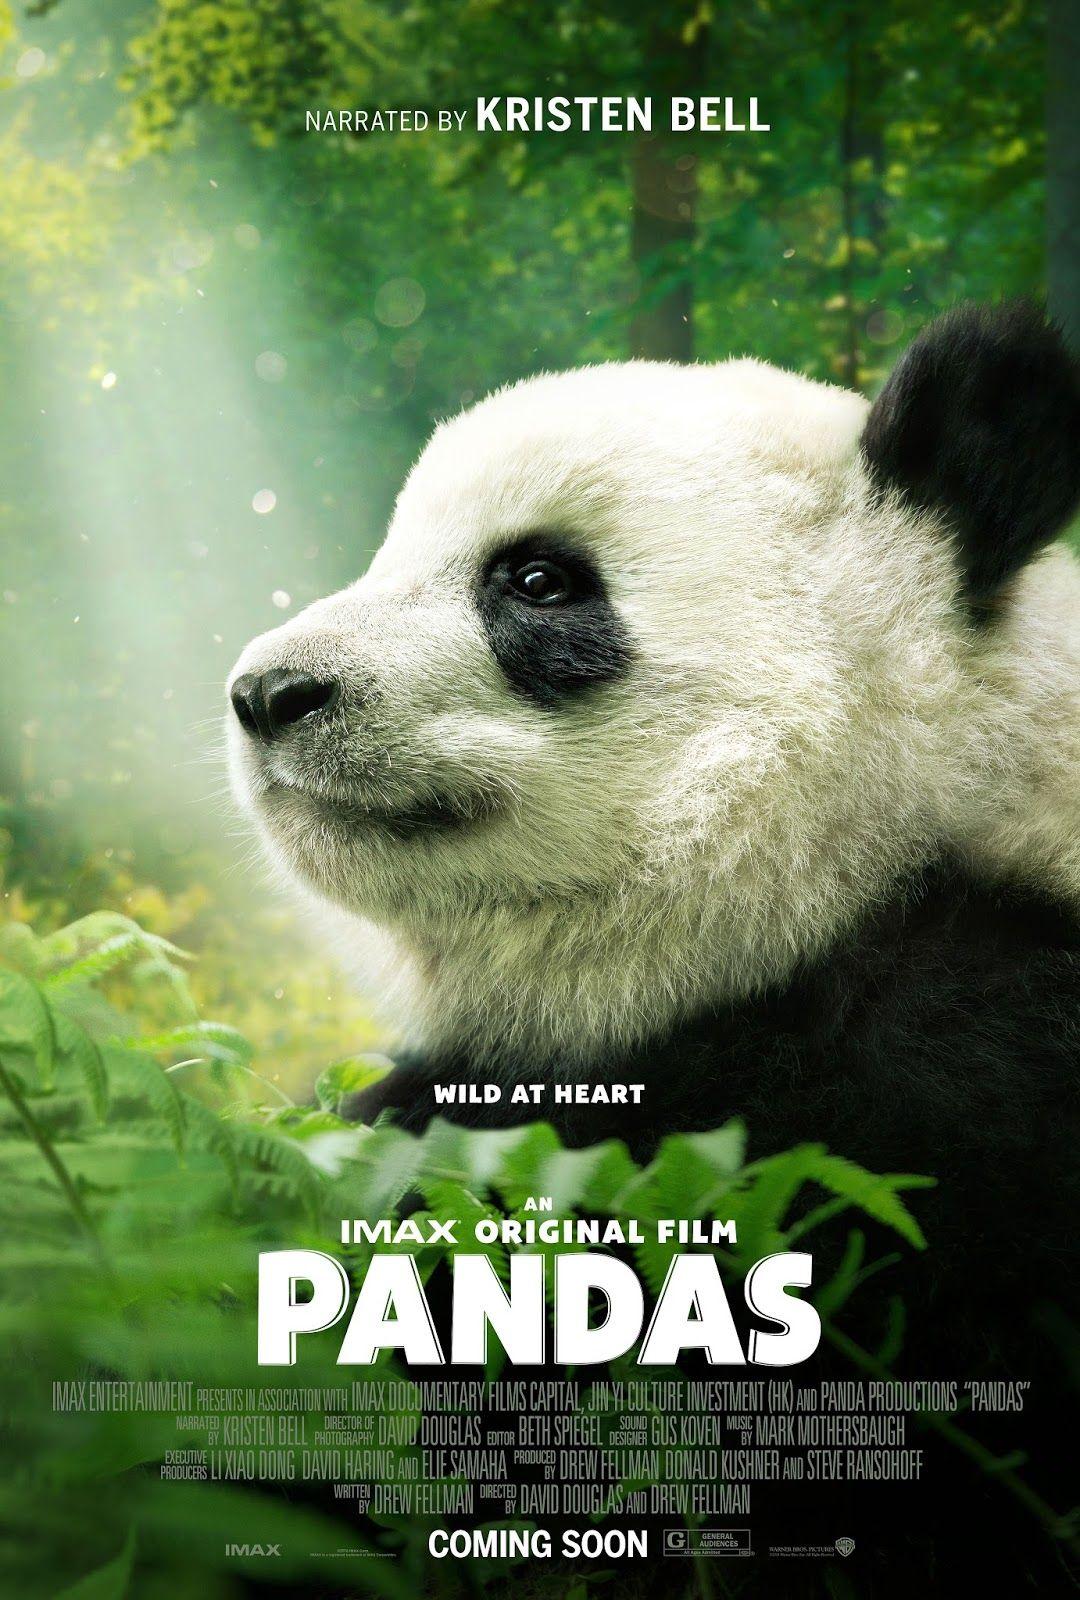 ChiIL Mama: IMAX® DOCUMENTARY PANDAS NARRATED BY KRISTEN BELL Begins